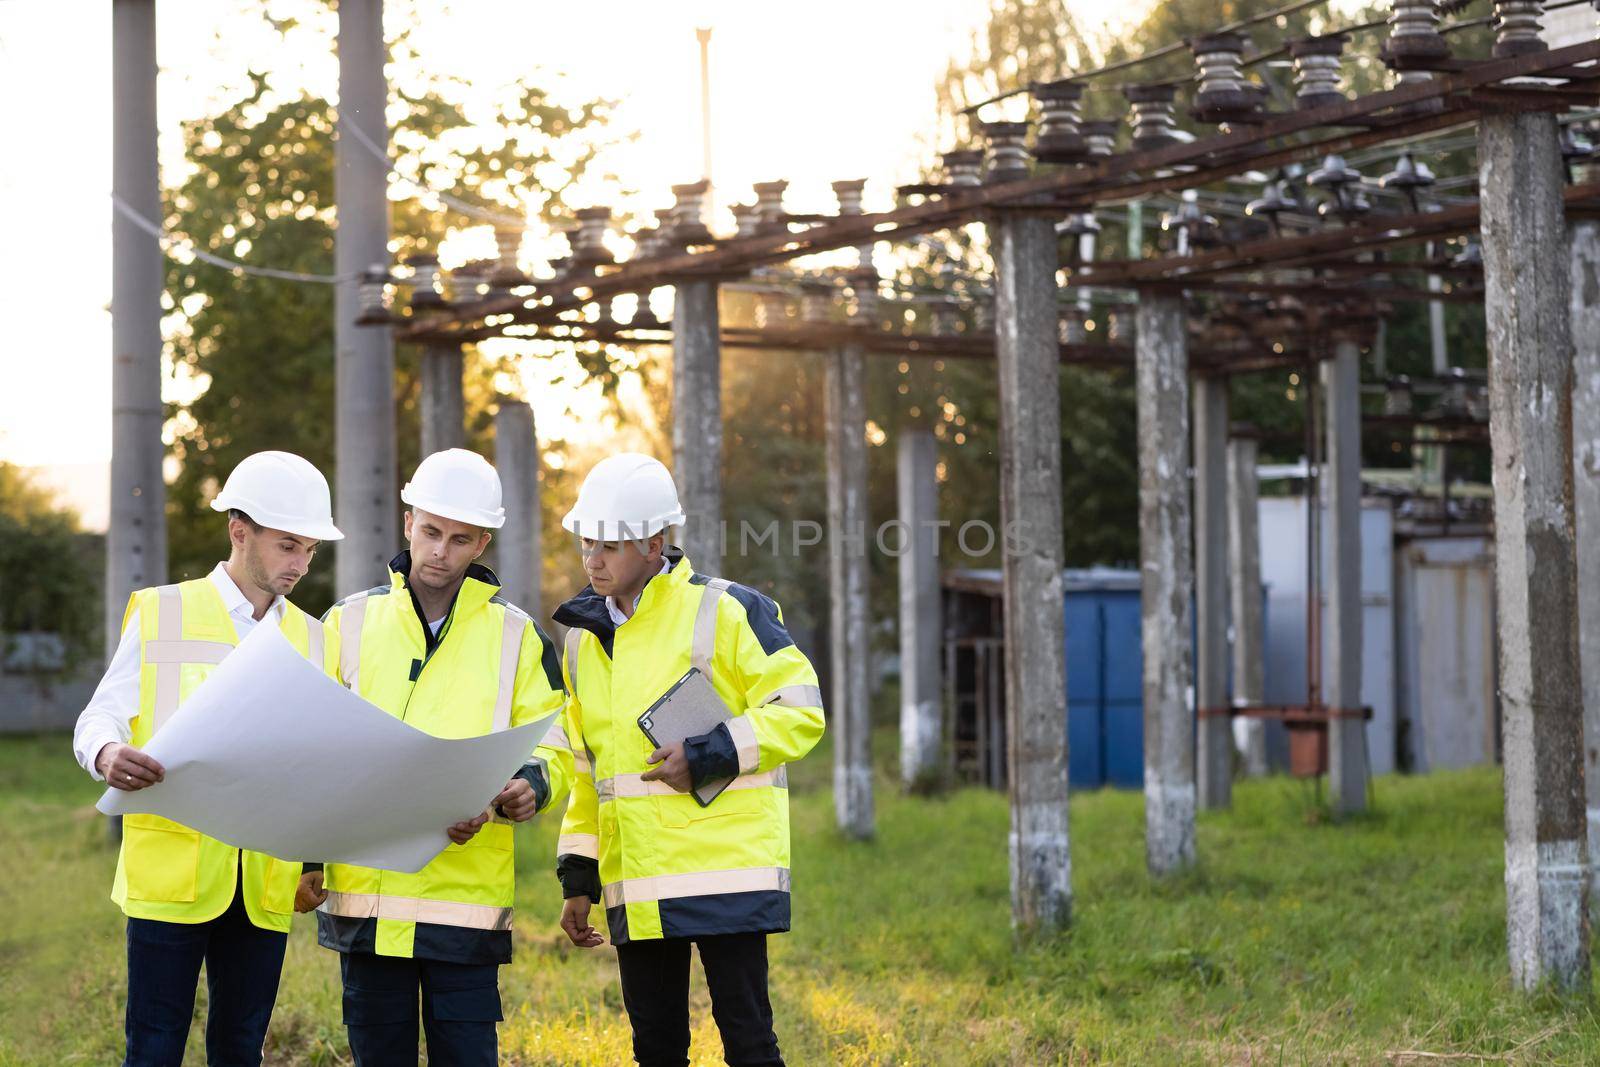 Power specialists are planning a new project outdoors. Three engineers walk near power lines in the high voltage power station. Electric industry, electrical energy production concept by uflypro